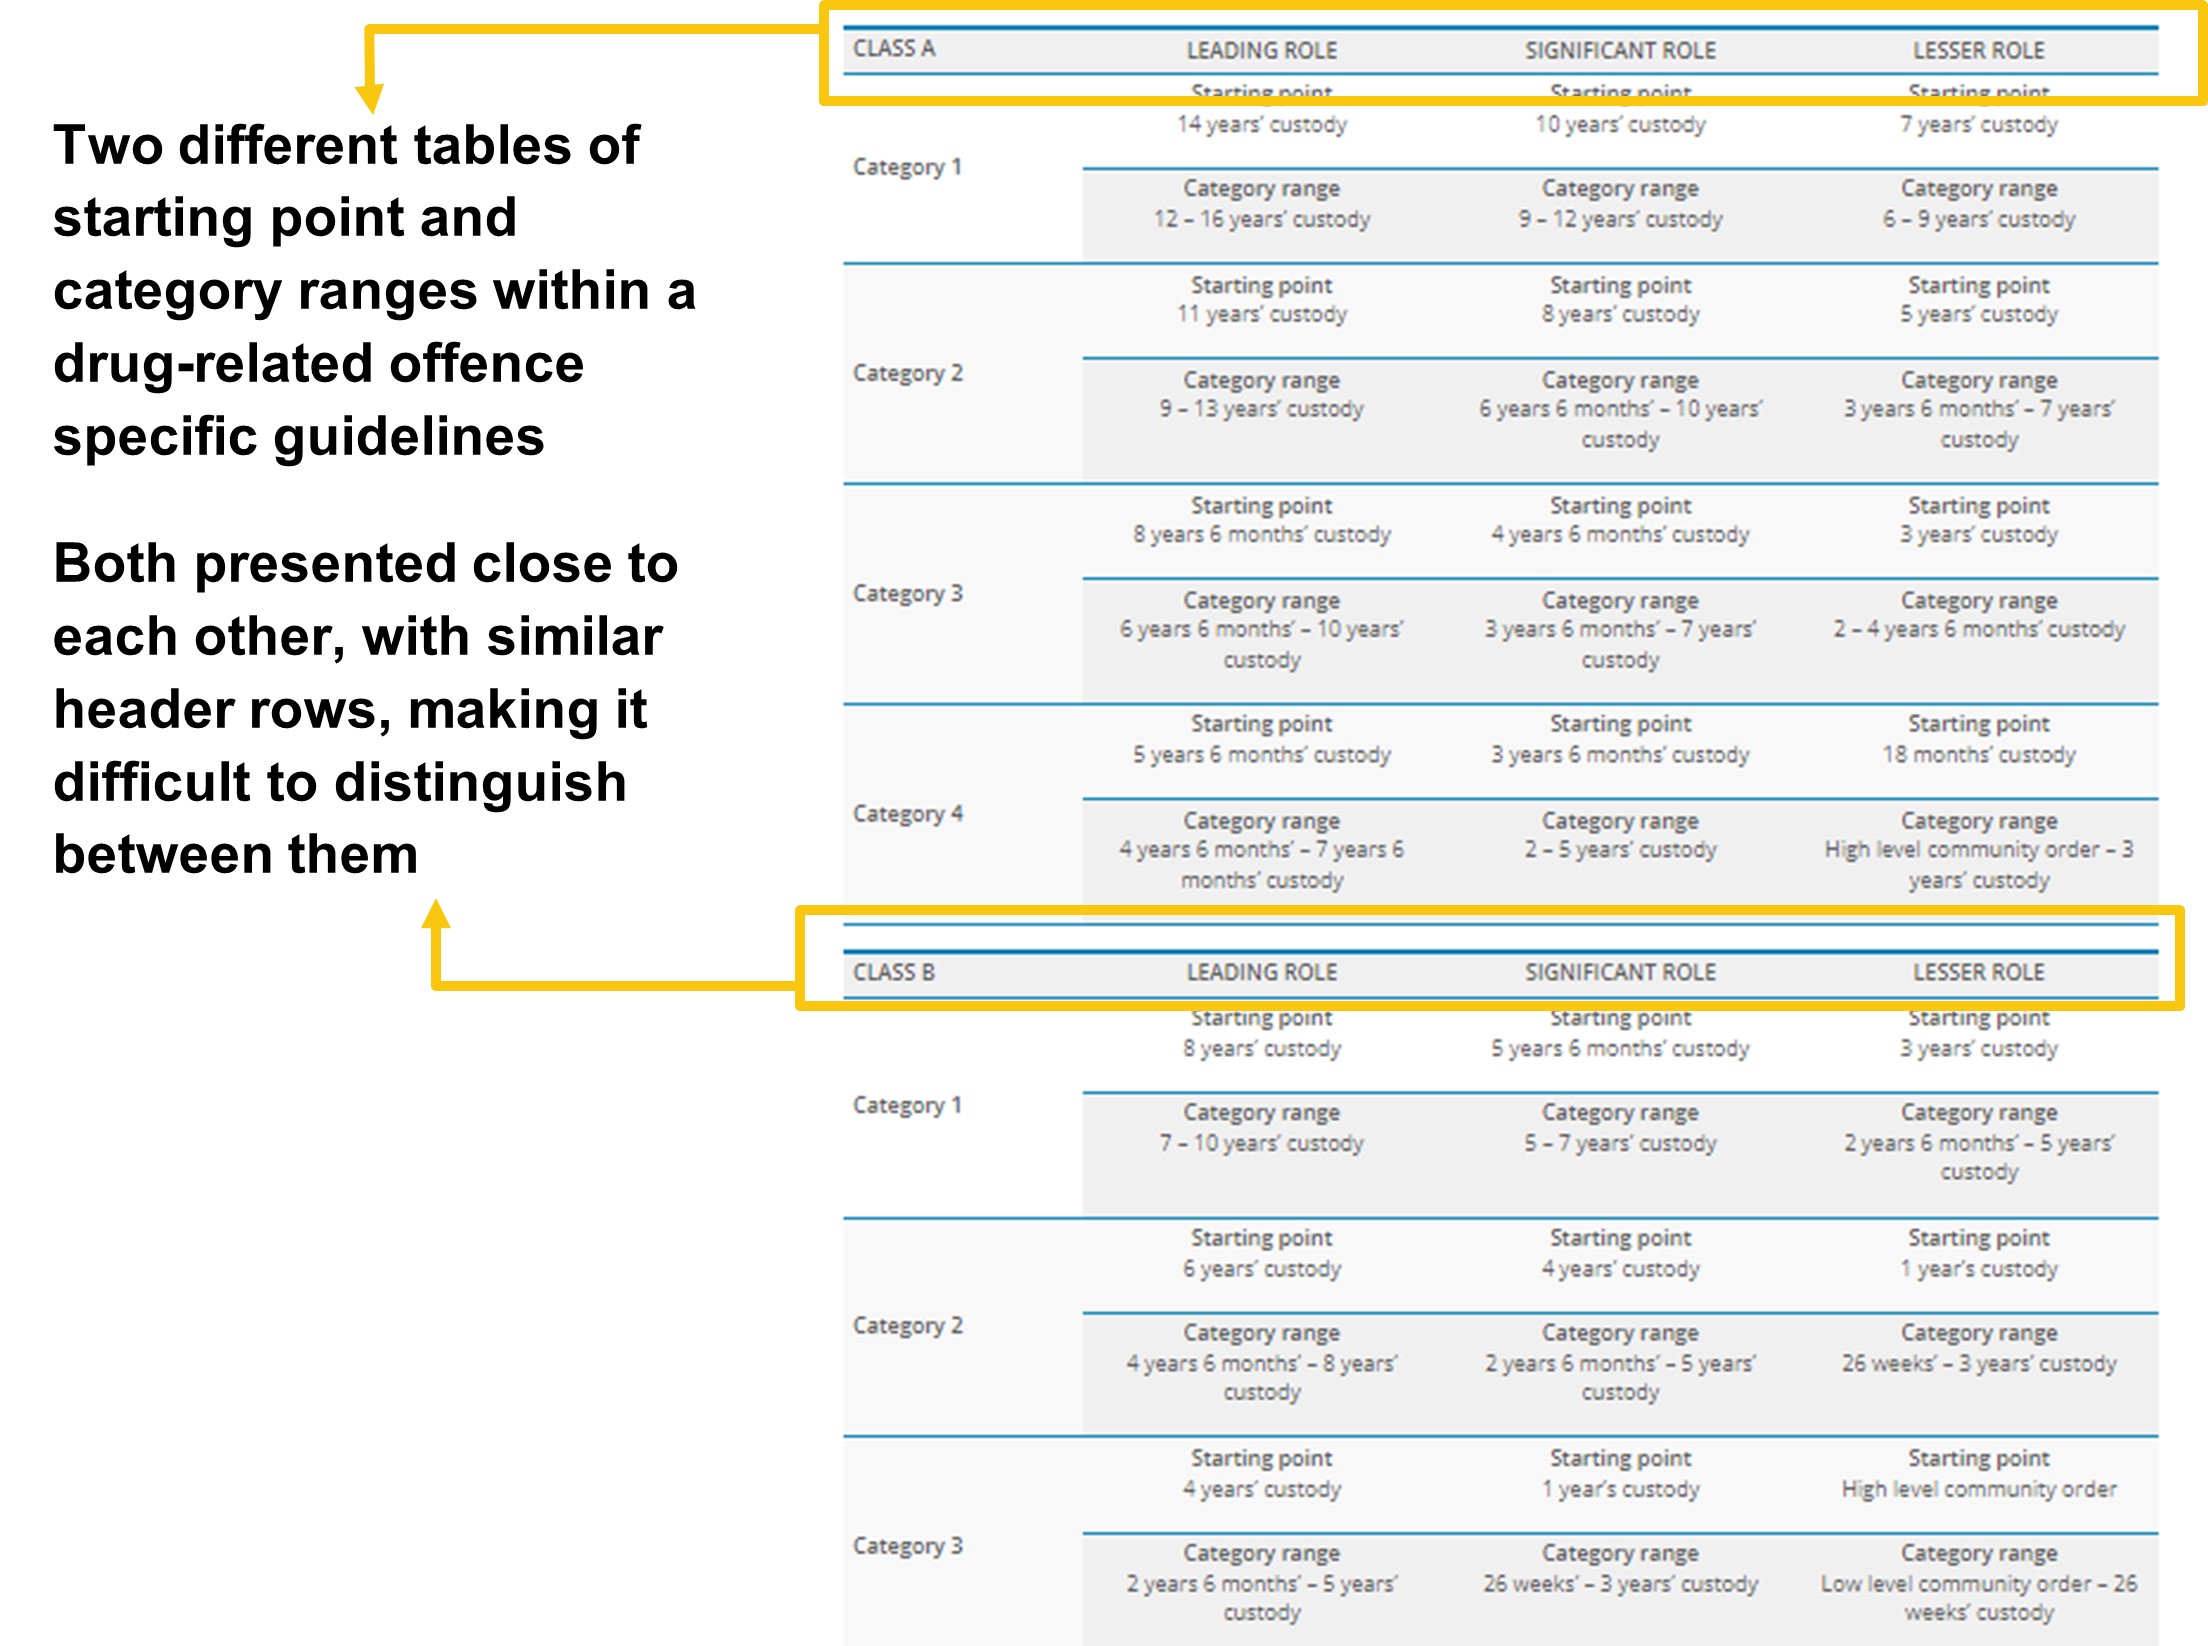 Image showing two different sentencing tables (Class A and Class B) for possession of a controlled drug with intent to supply it to another